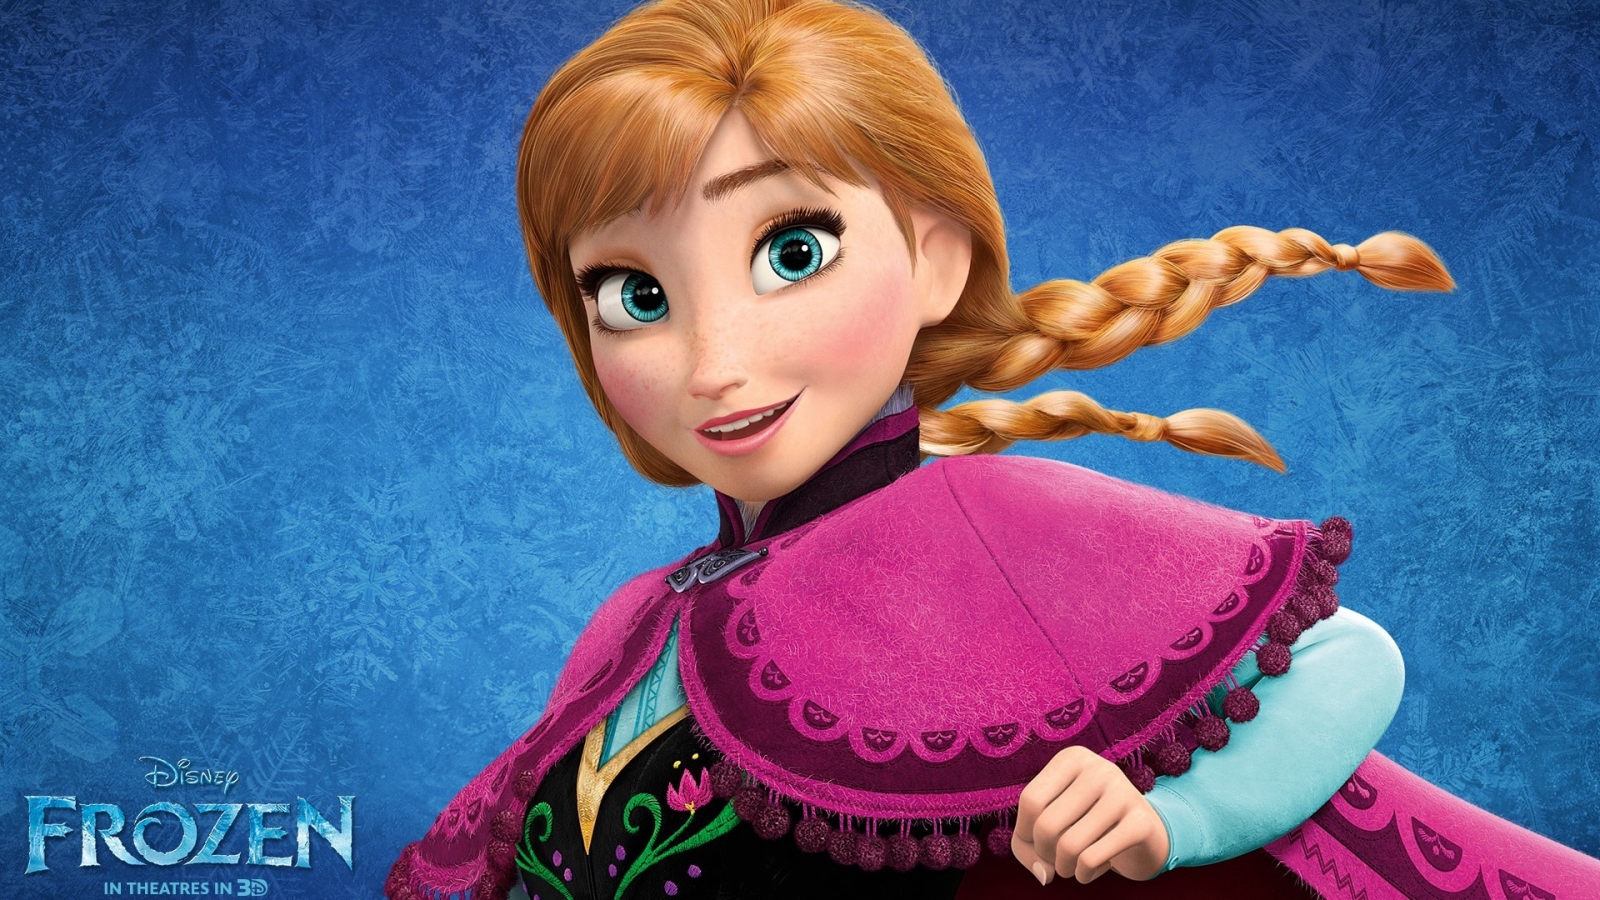 Frozen Movie Character for 1600 x 900 HDTV resolution